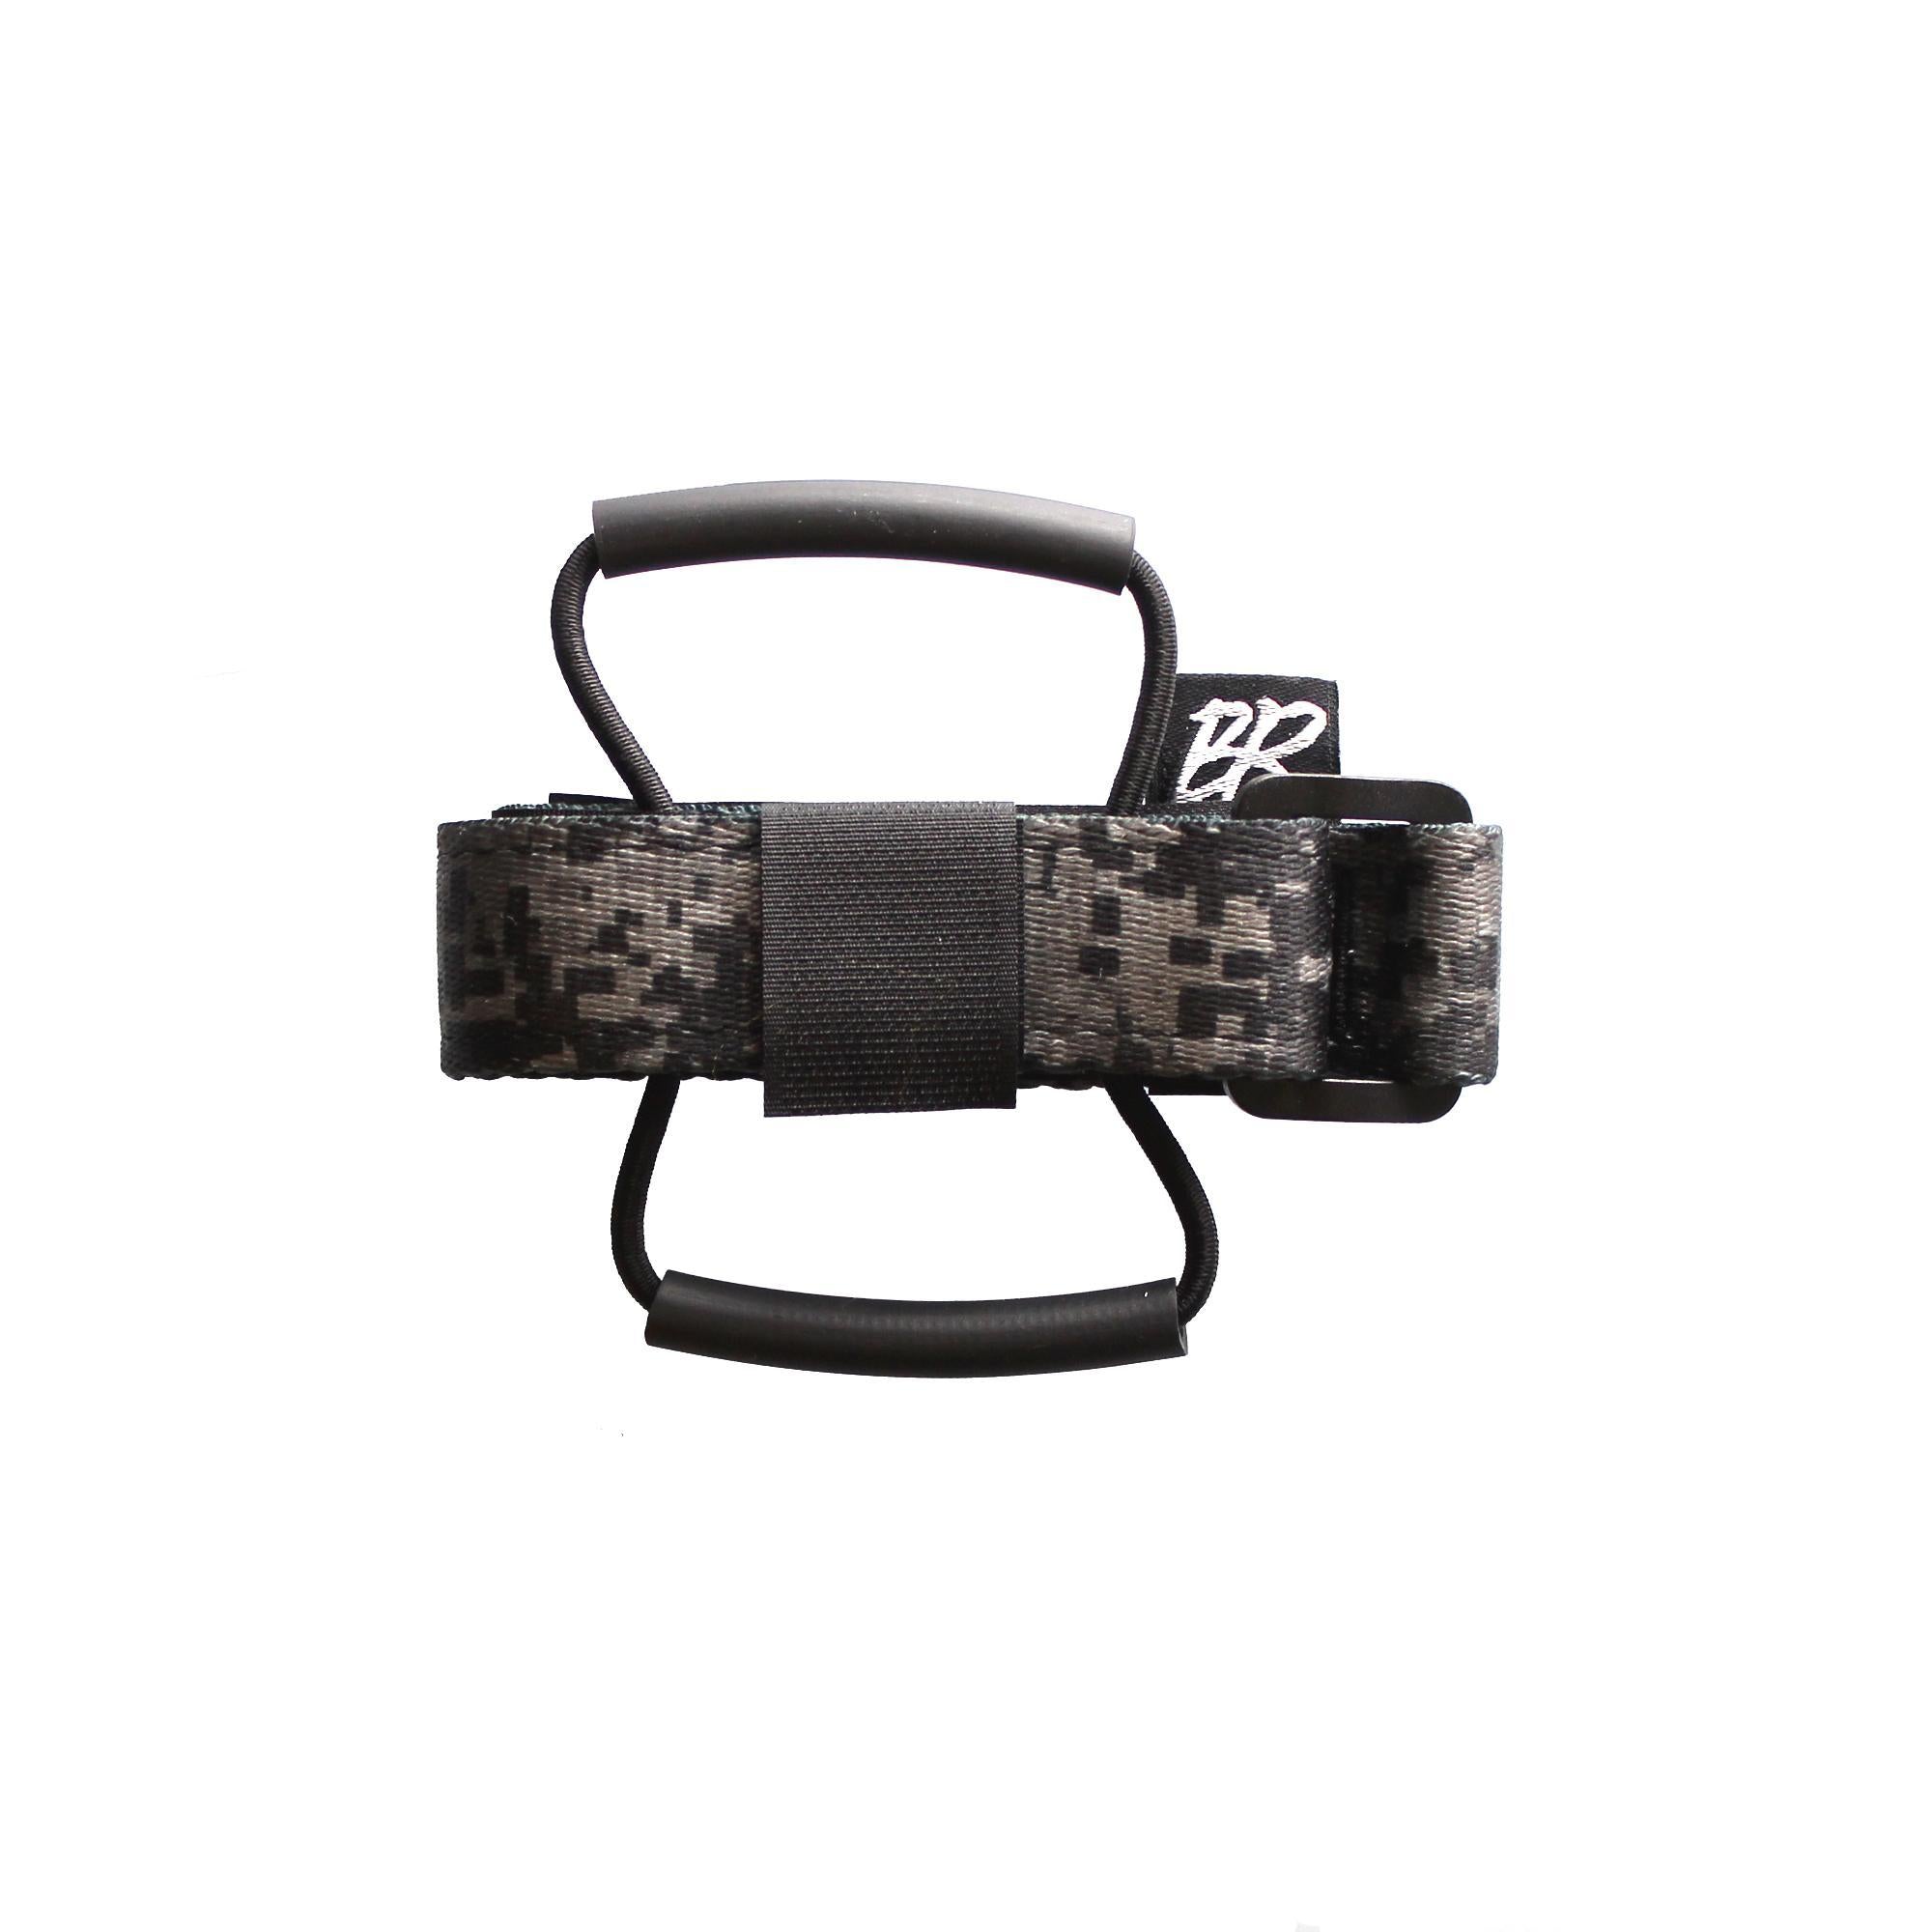 Back country research race strap digital camo black in colour